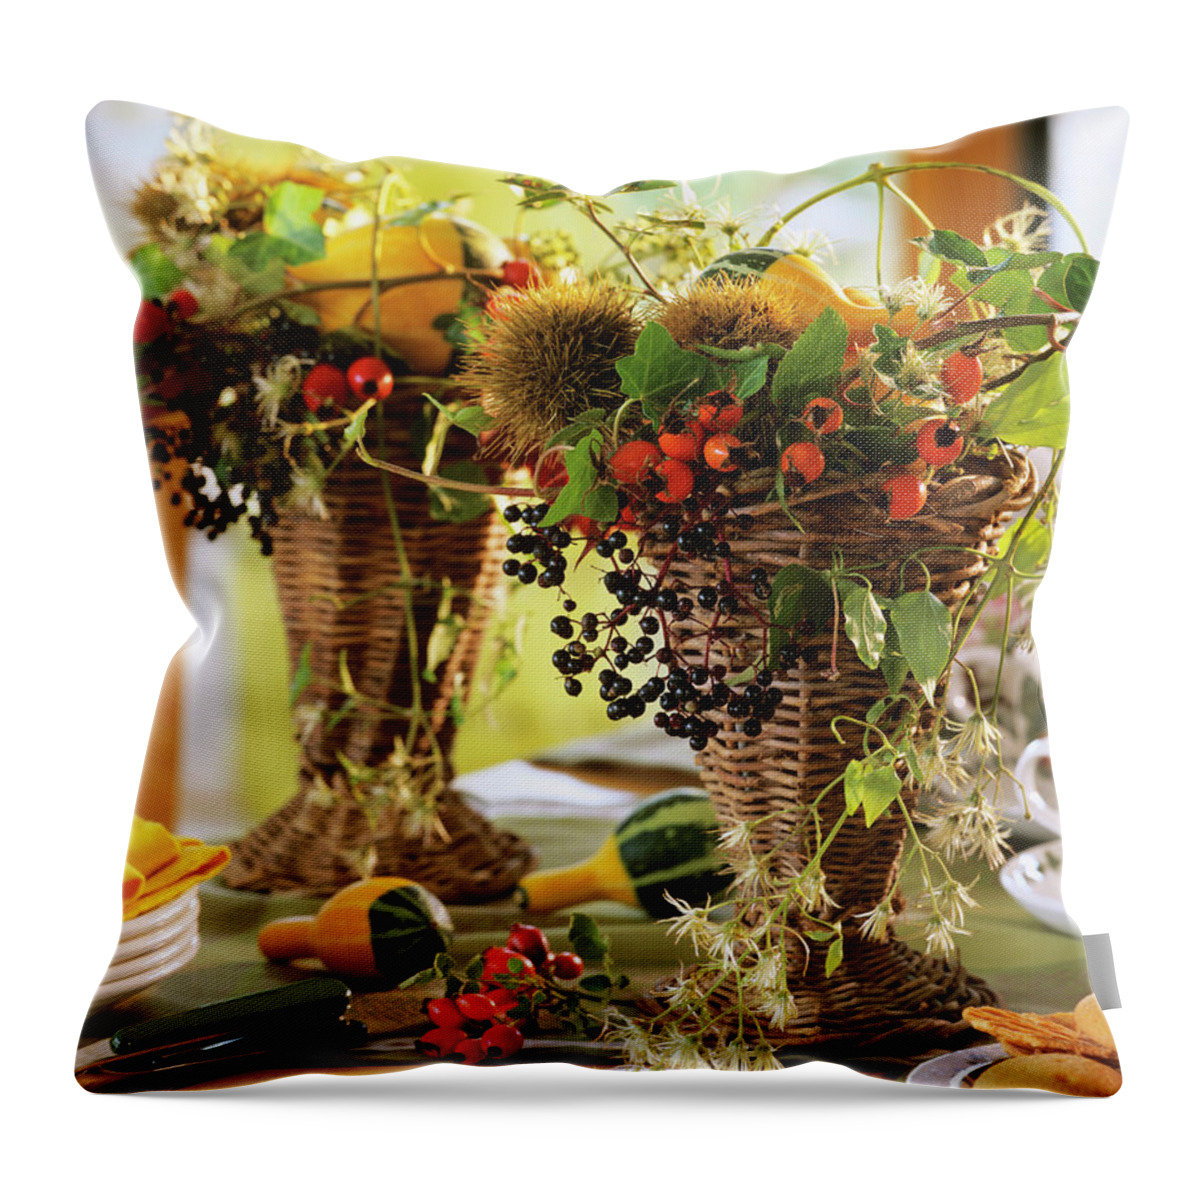 Ip_00272491 Throw Pillow featuring the photograph Table Arrangements Of Ornamental Gourds, Clematis & Rose Hips by Friedrich Strauss